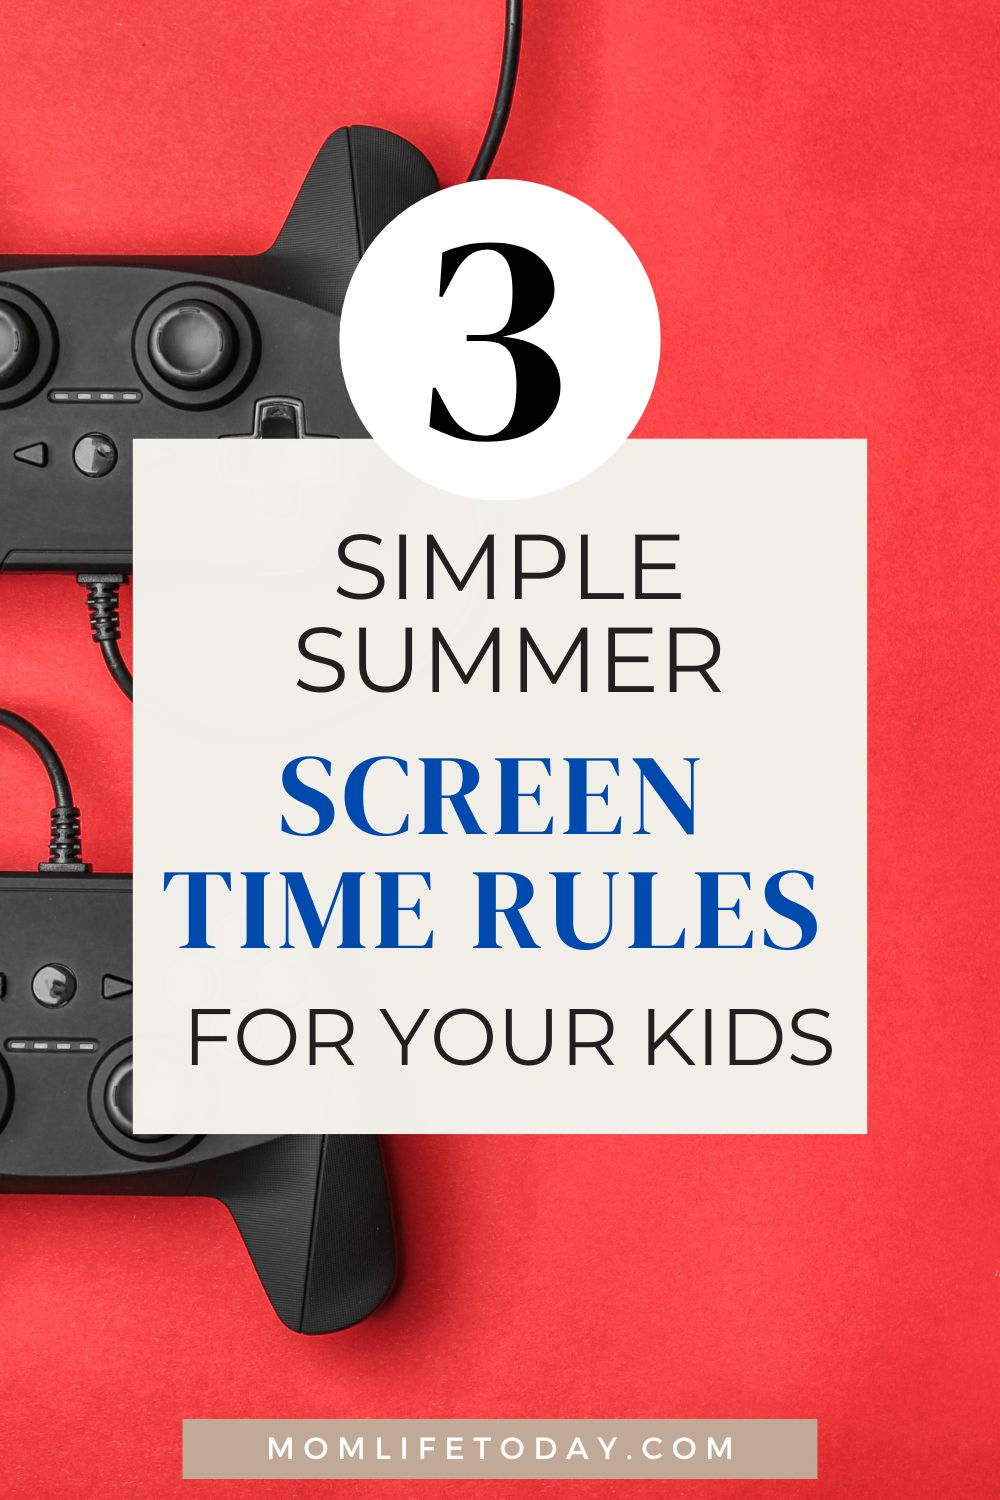 Summer screen time rules